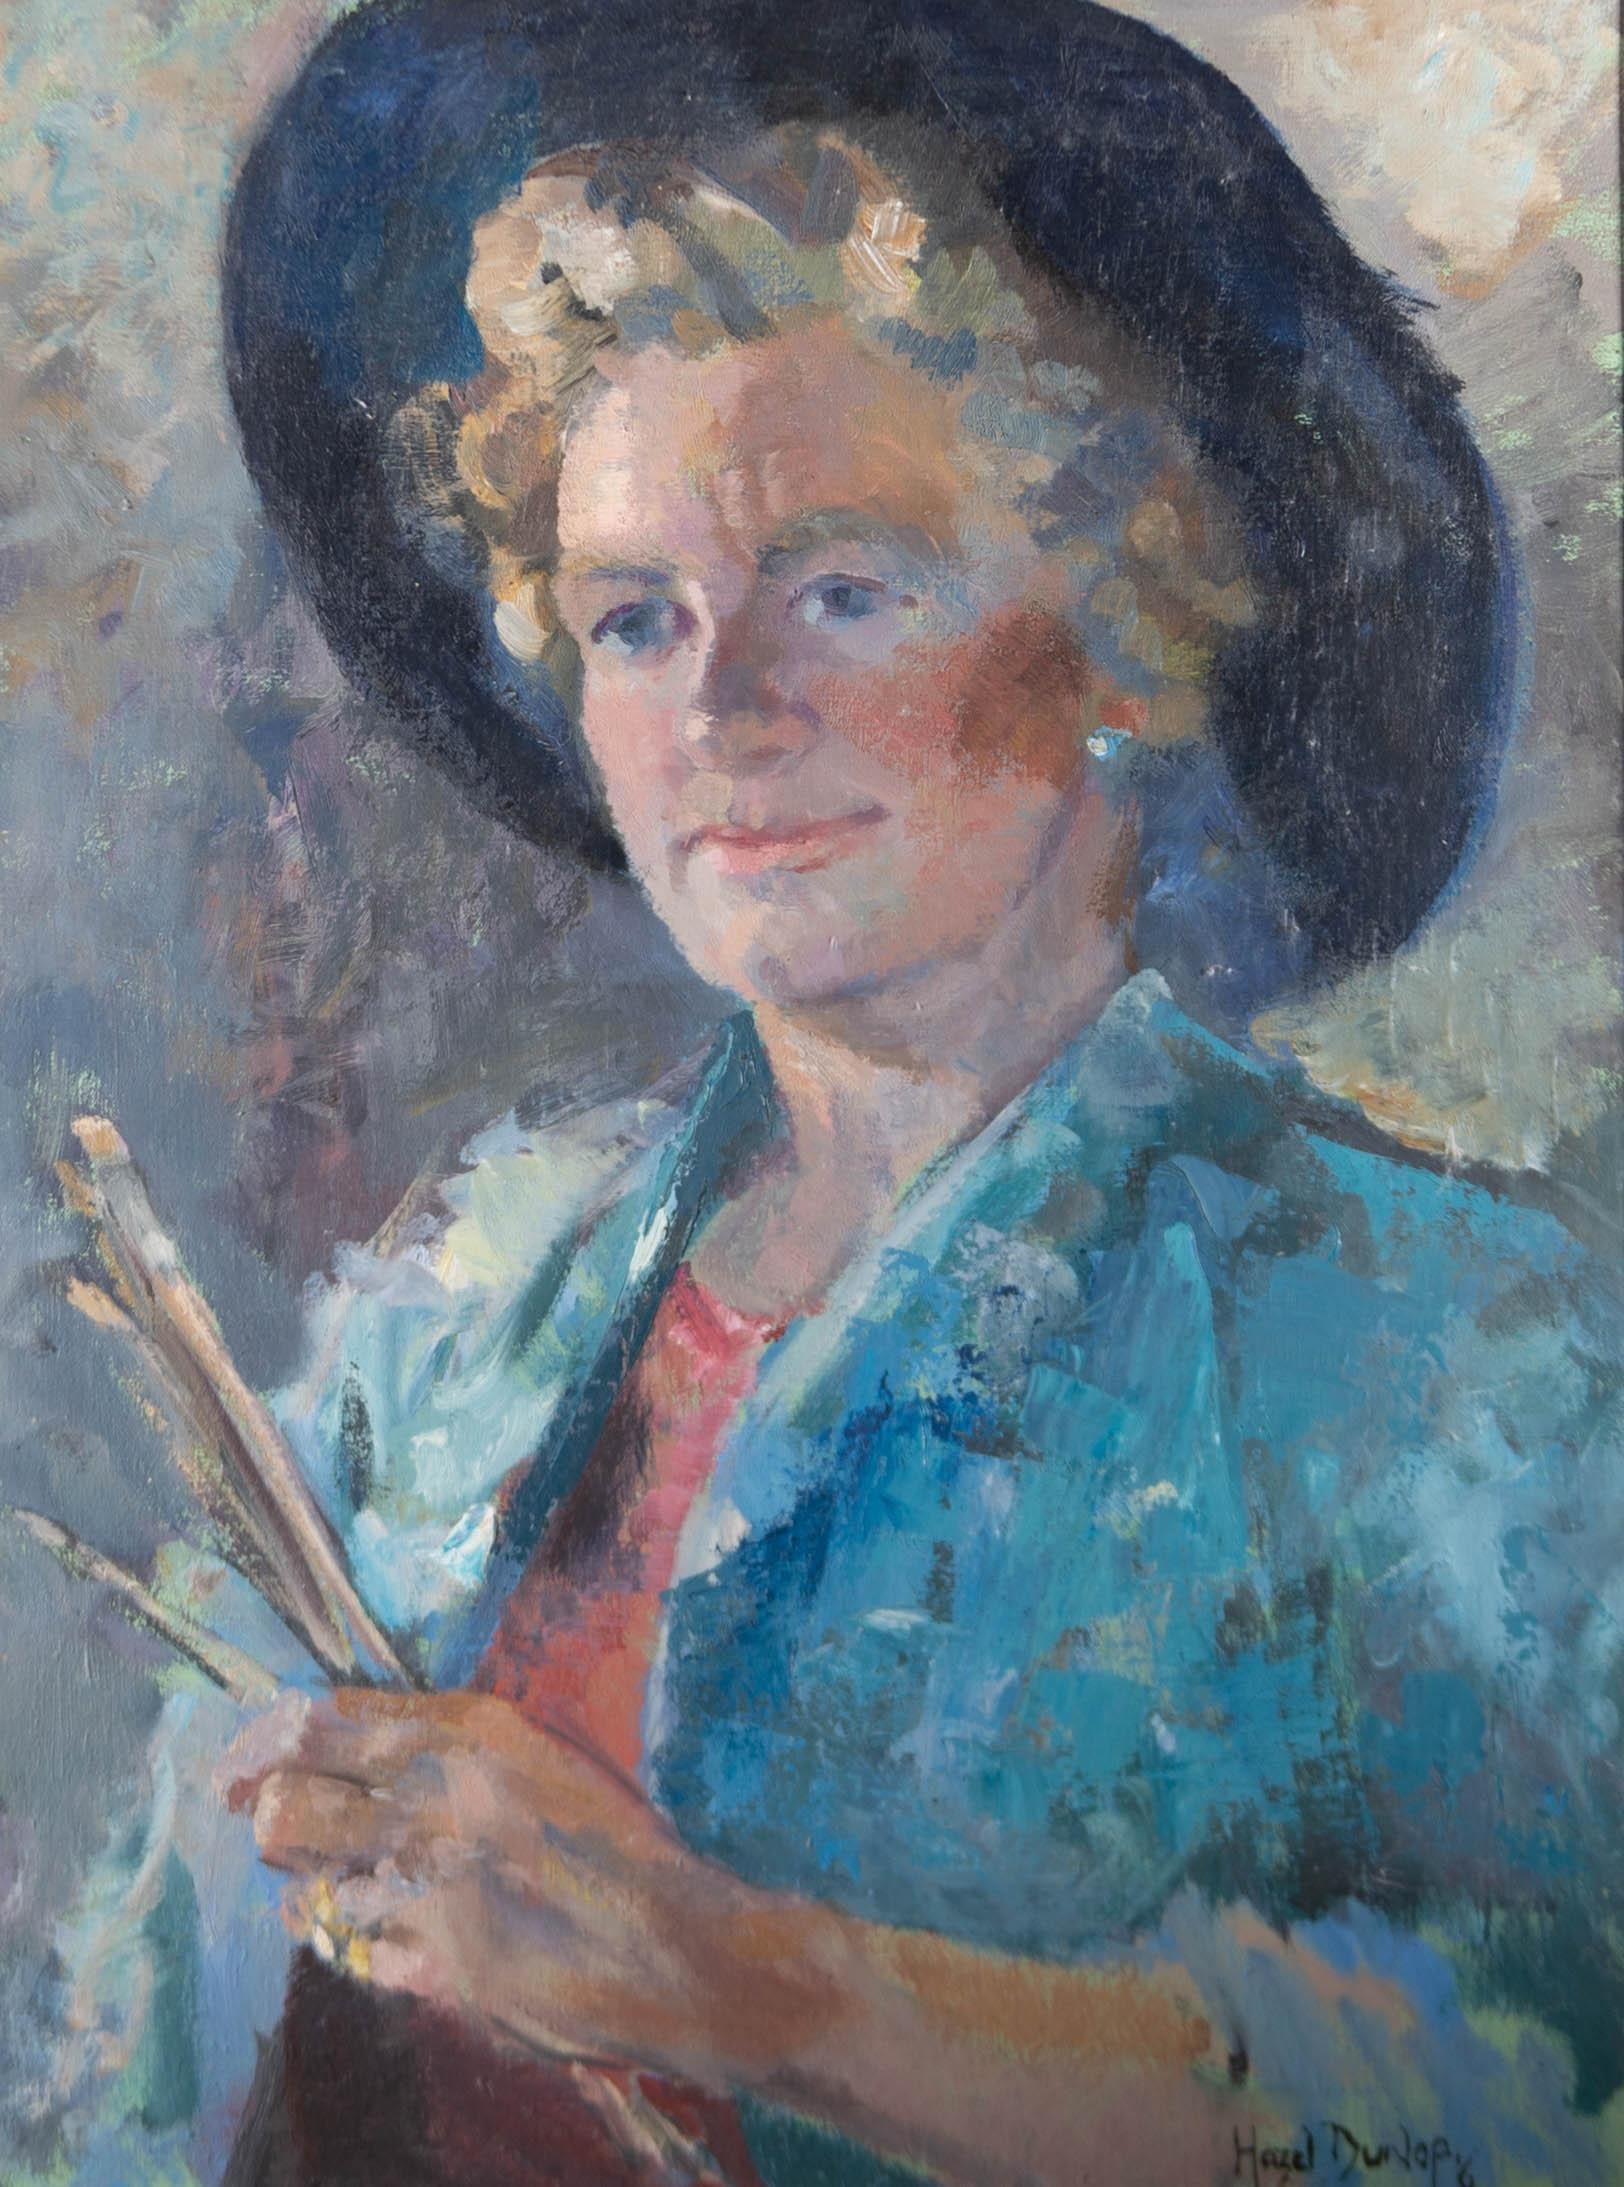 An emotive oil painting by the artist Hazel Dunlop, depicting a portrait of fellow artist Barbara Doyle. Signed to the lower right-hand corner. There is a 'Society of Women Artists' label on the reverse inscribed with additional details.